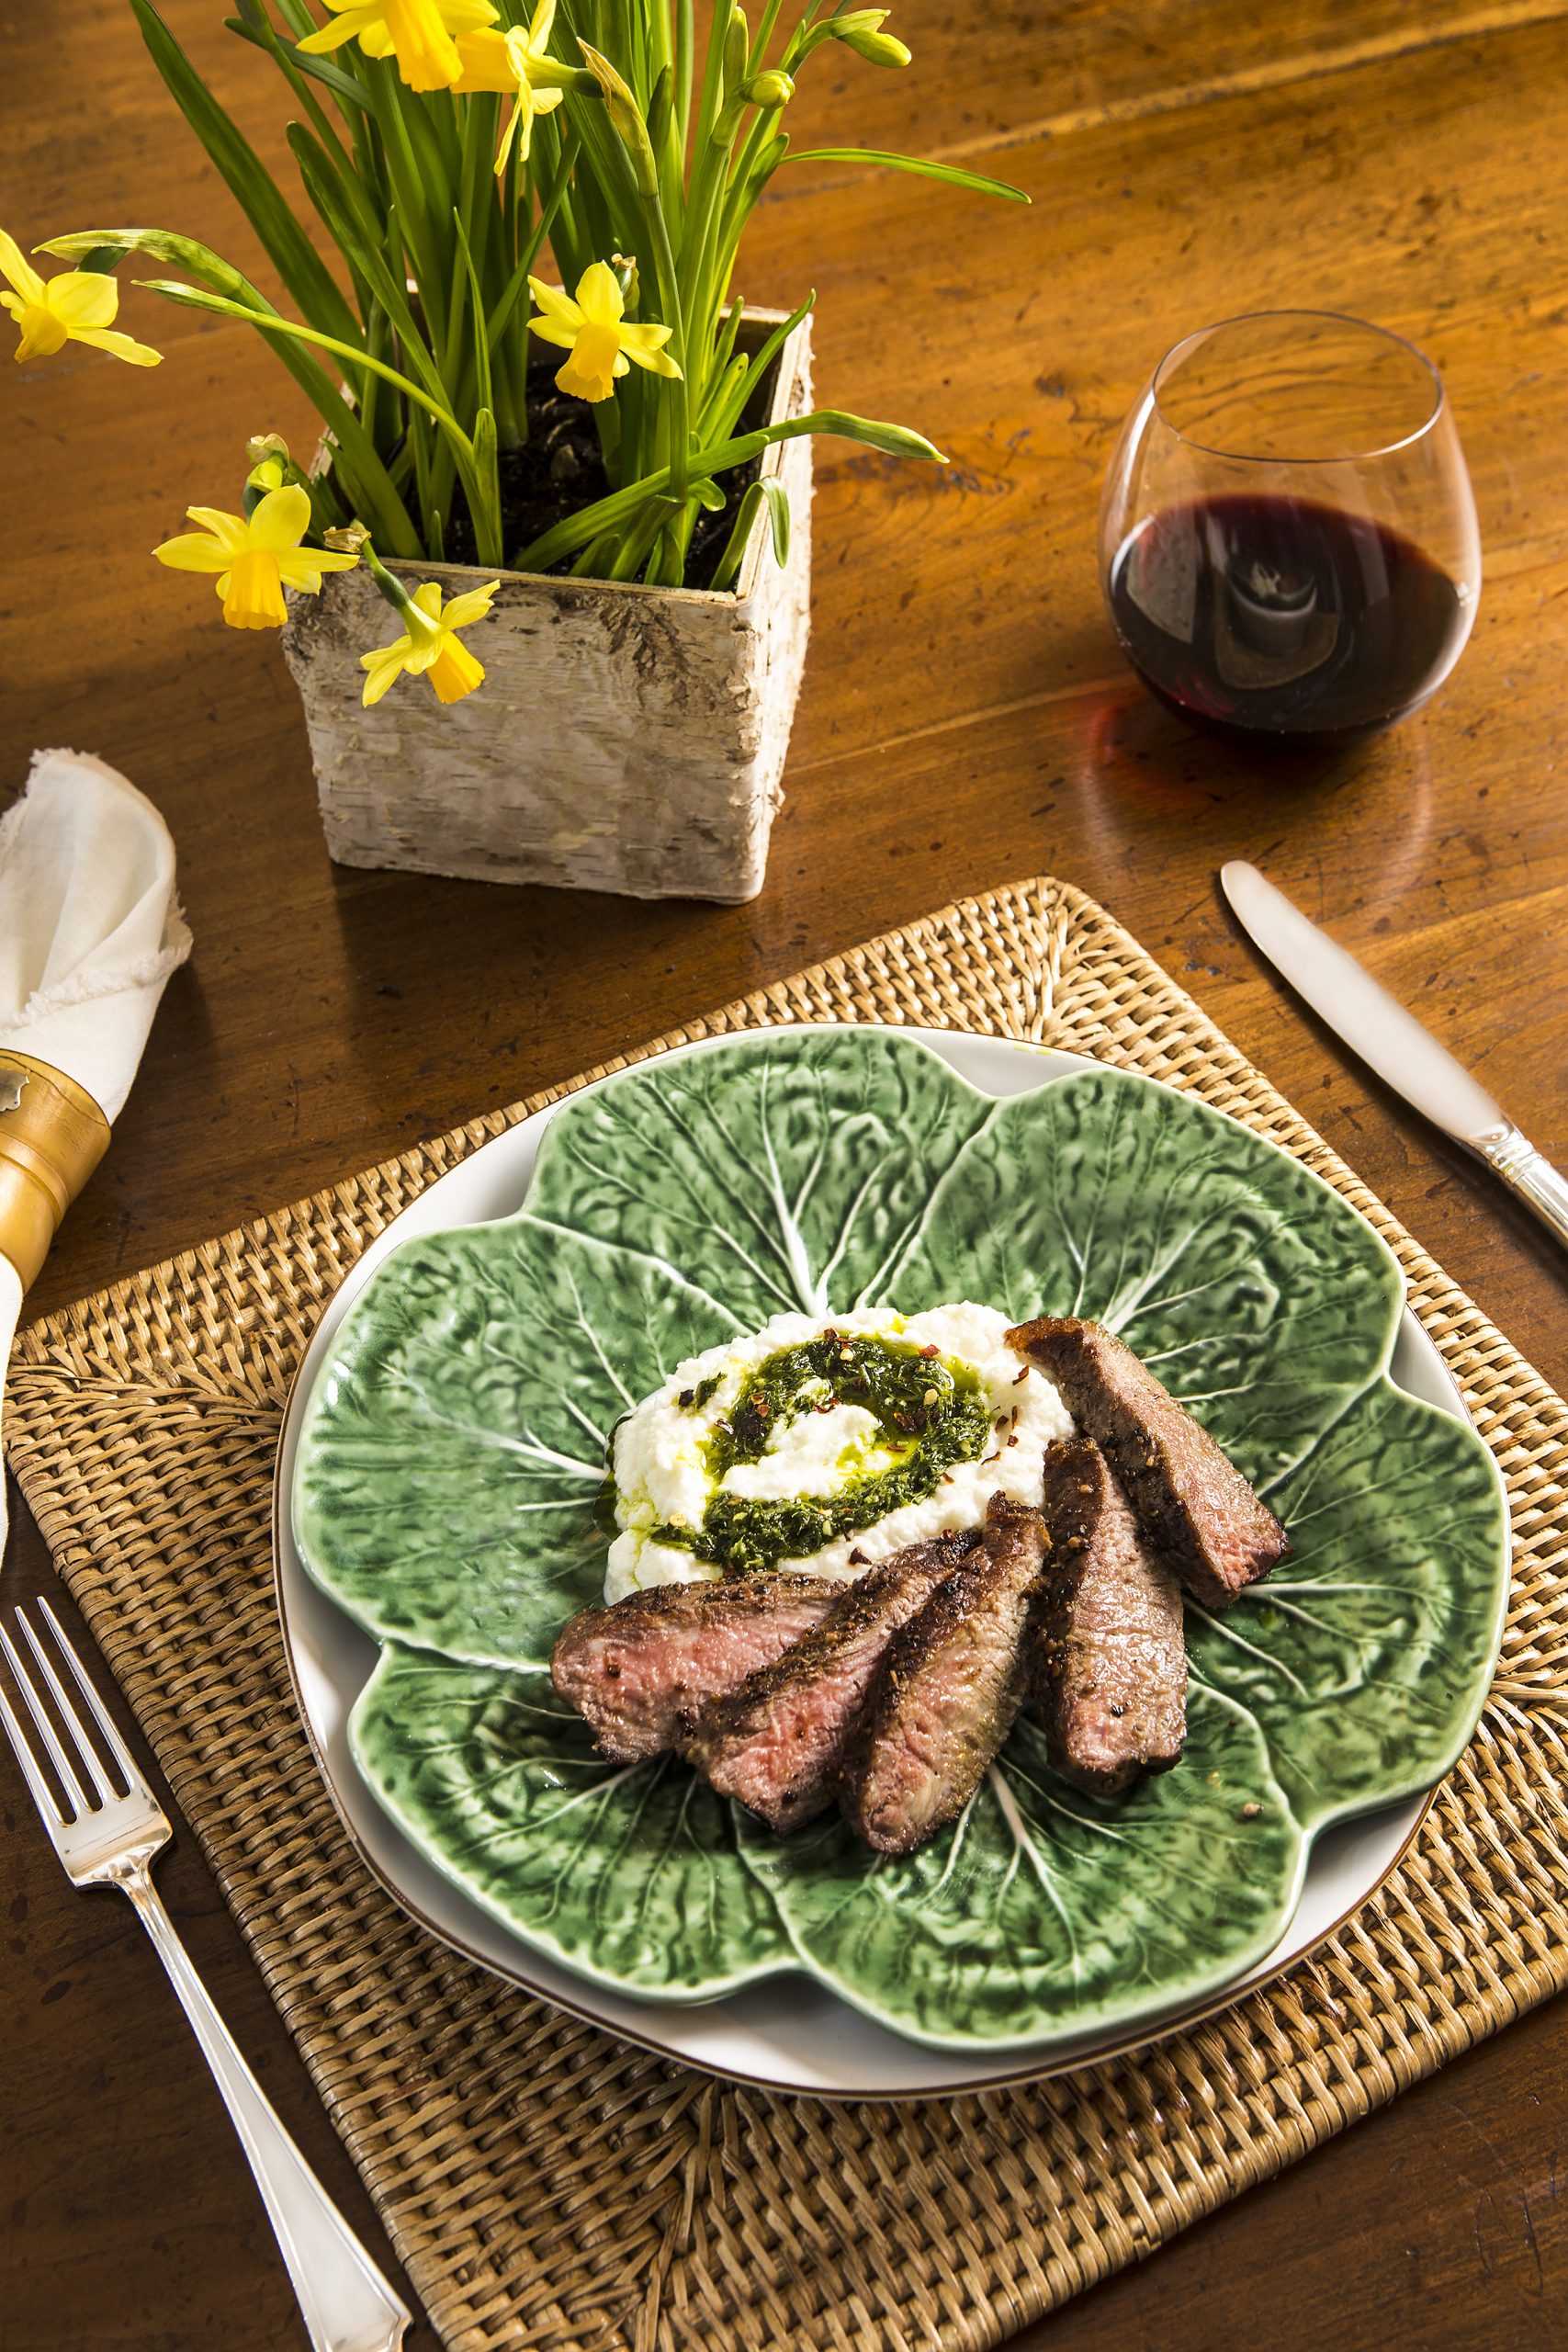 Tasty steak and mashed cauliflower with chimichurri sauce is a nontraditional, quick and easy combination, which makes a beautiful presentation! 
Bordallo Pinheiro Cabbage Plate from Portugal with Juliska Puro Whitewash Dinner Plate and rattan placemat, courtesy of Cottage & Vine.